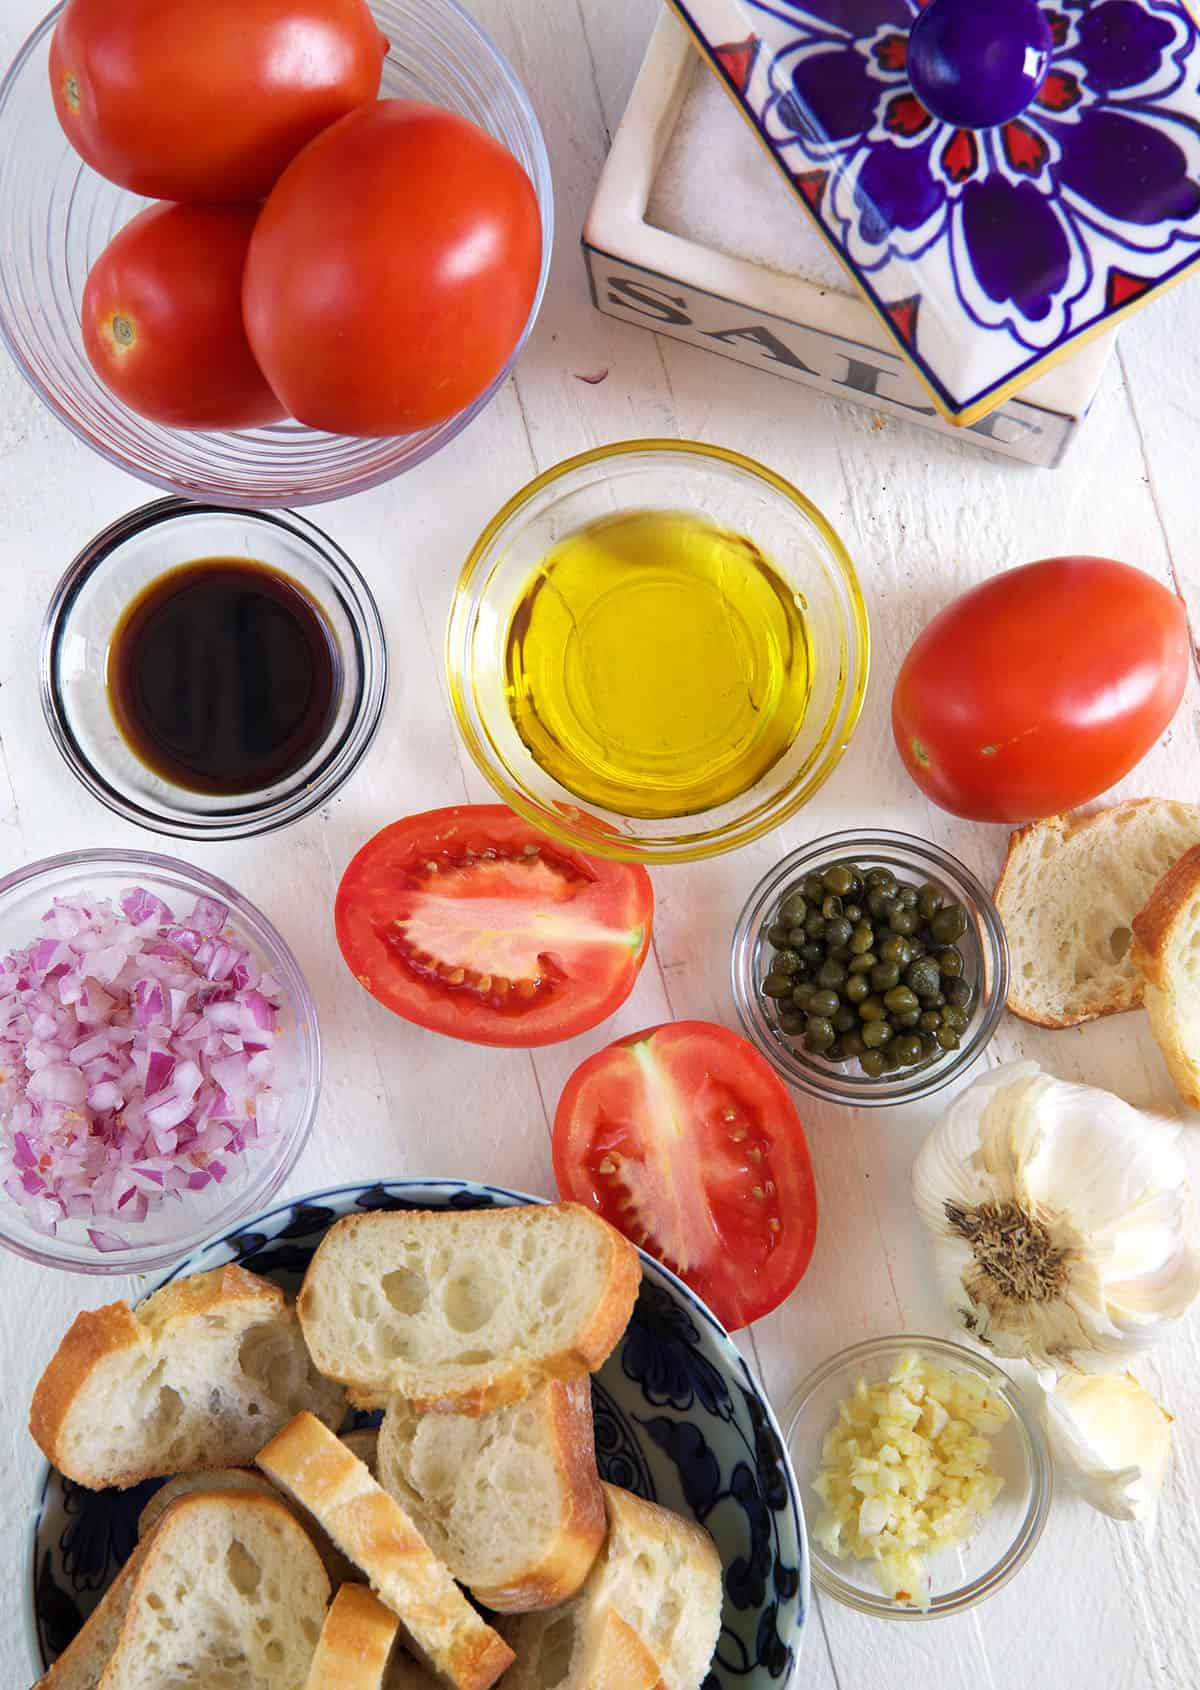 The ingredients for homemade bruschetta are placed on a white surface.